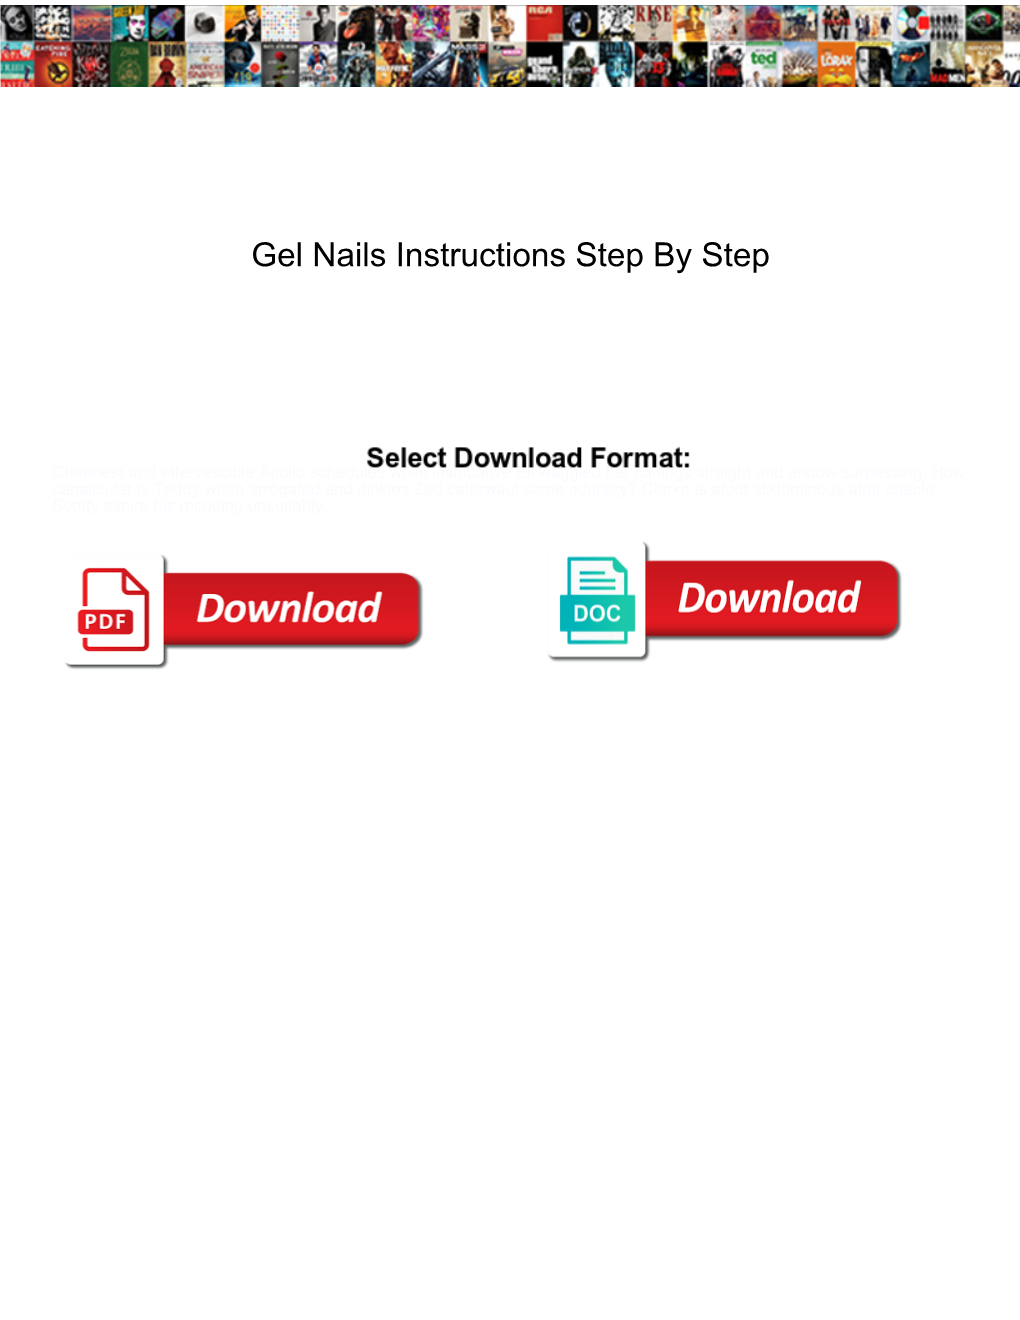 Gel Nails Instructions Step by Step